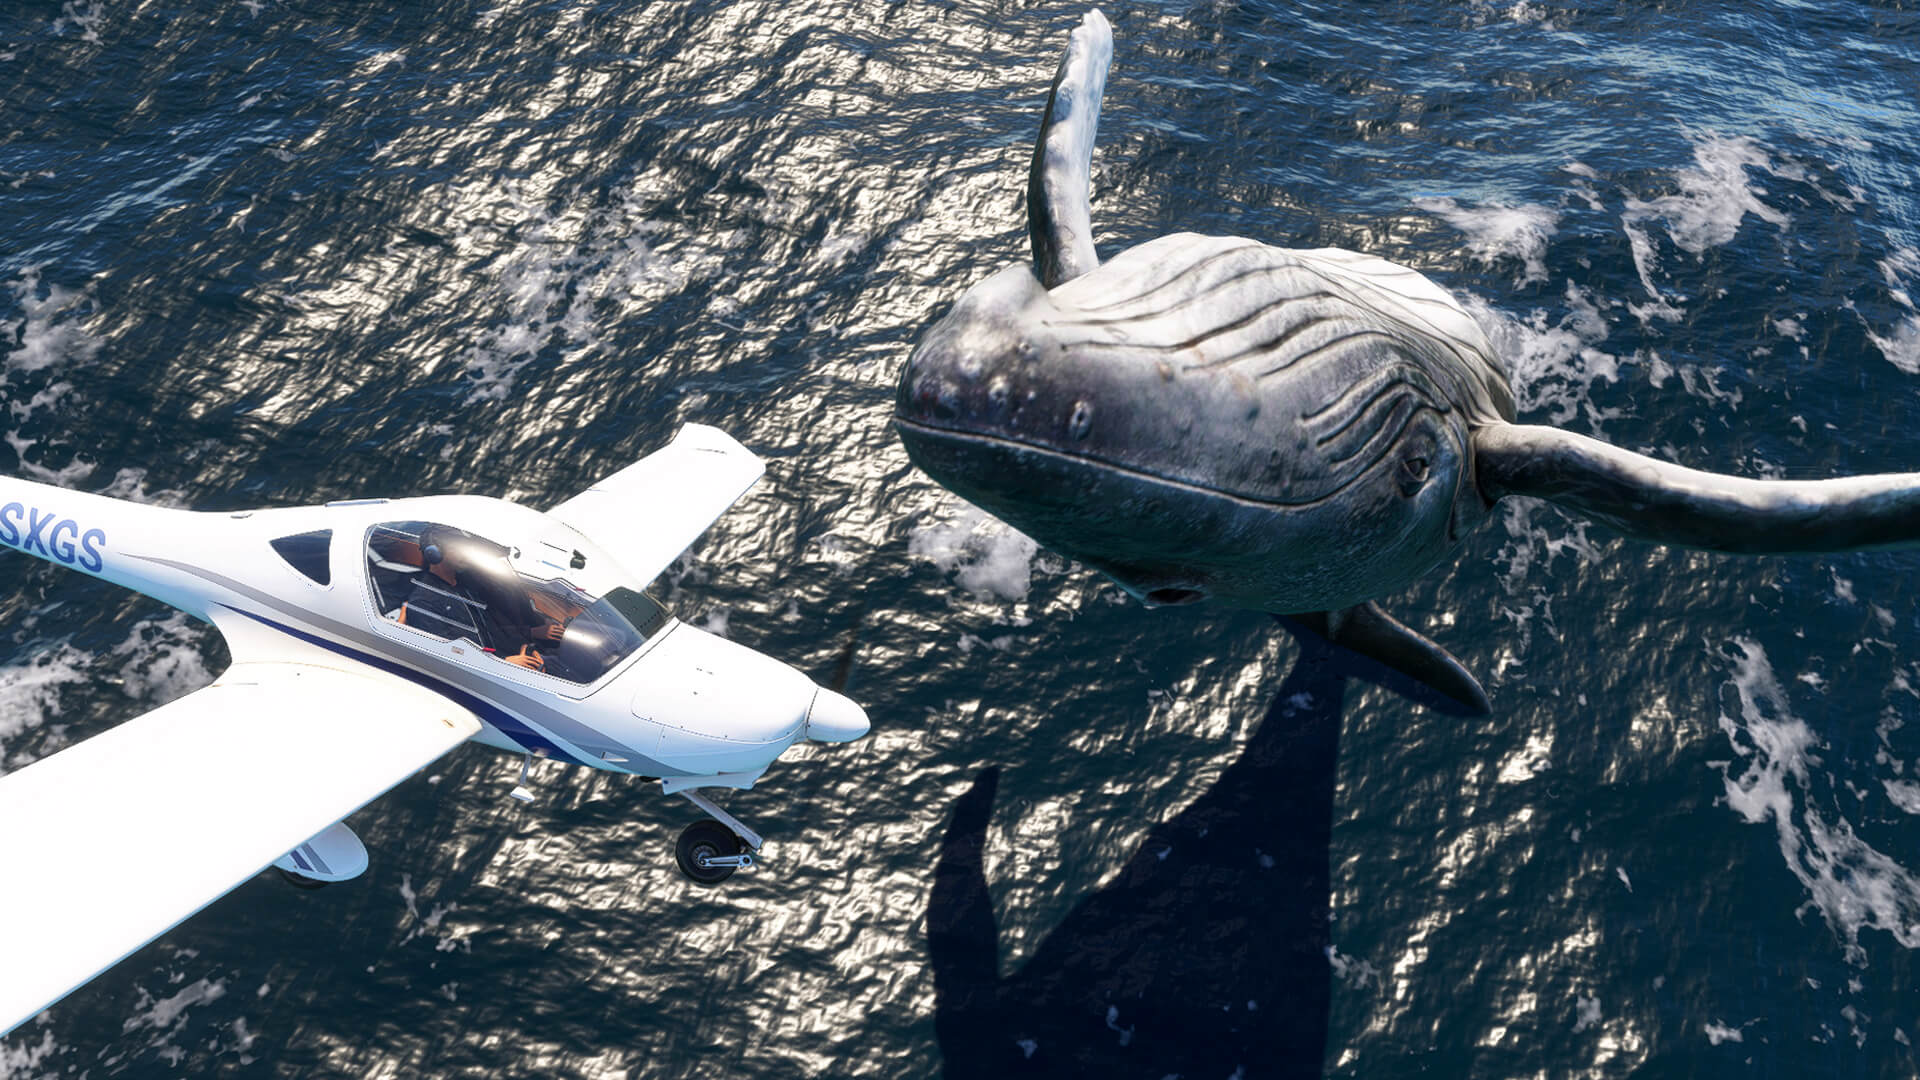 A low-wing propeller aircraft passes very close above a whale jumping from the ocean